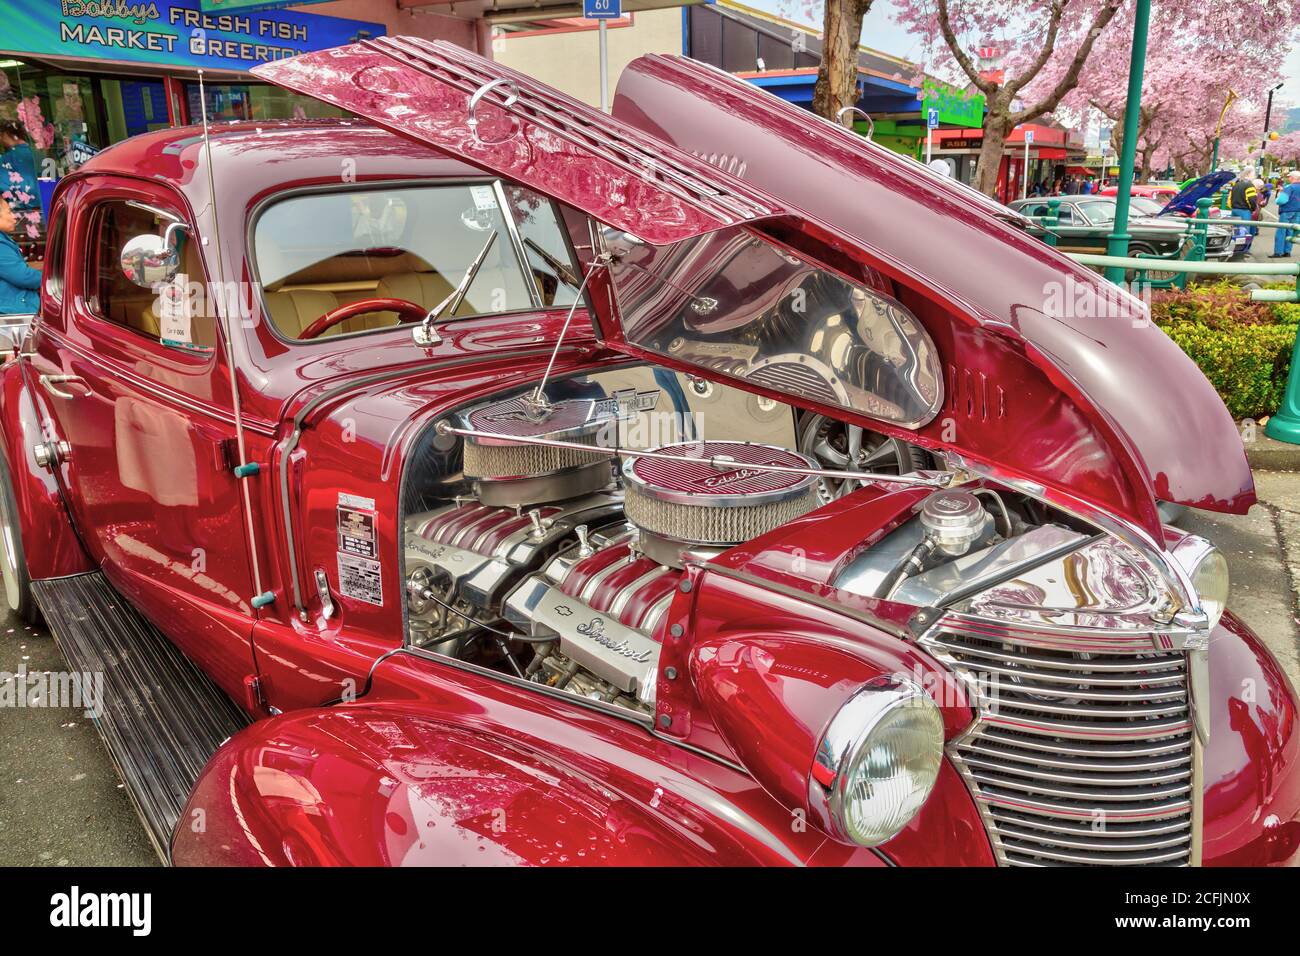 A 1938 Chevrolet Coupe with gleaming maroon bodywork, seen at an outdoor classic car show in Tauranga, New Zealand. September 22 2018 Stock Photo